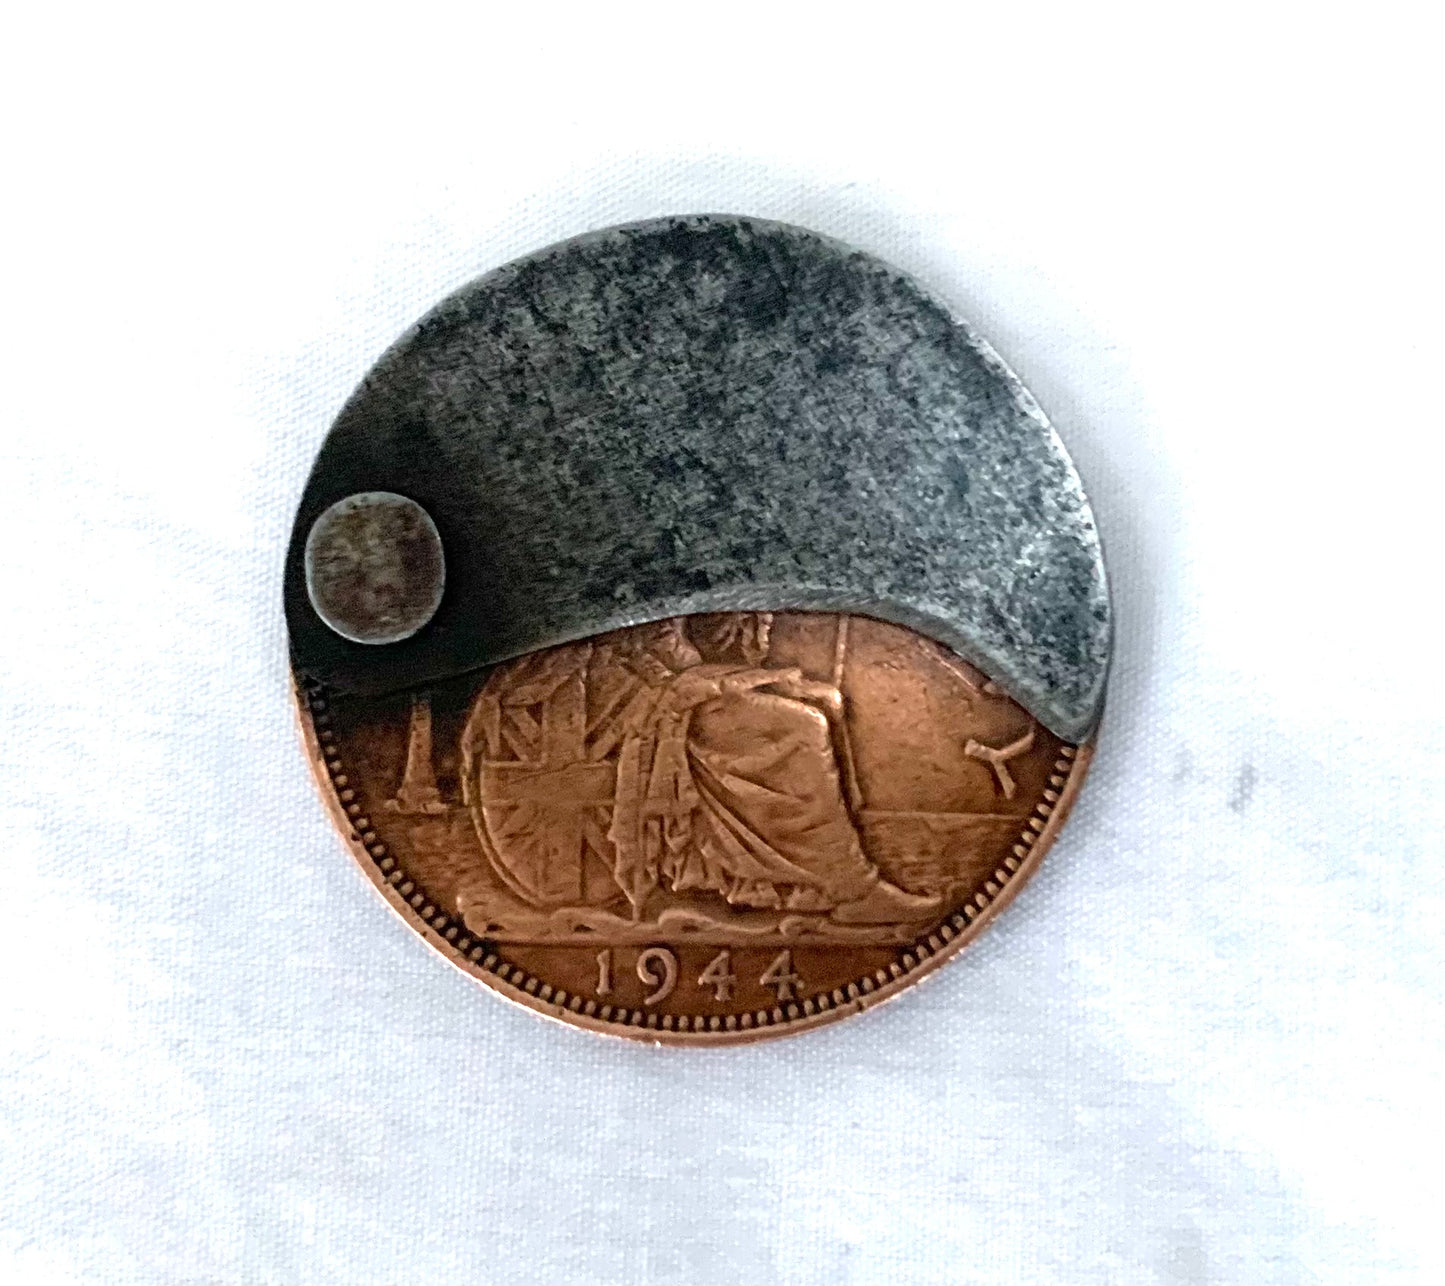 WW2 Commando/SOE British Penny with Concealed Blade Dated 1944.